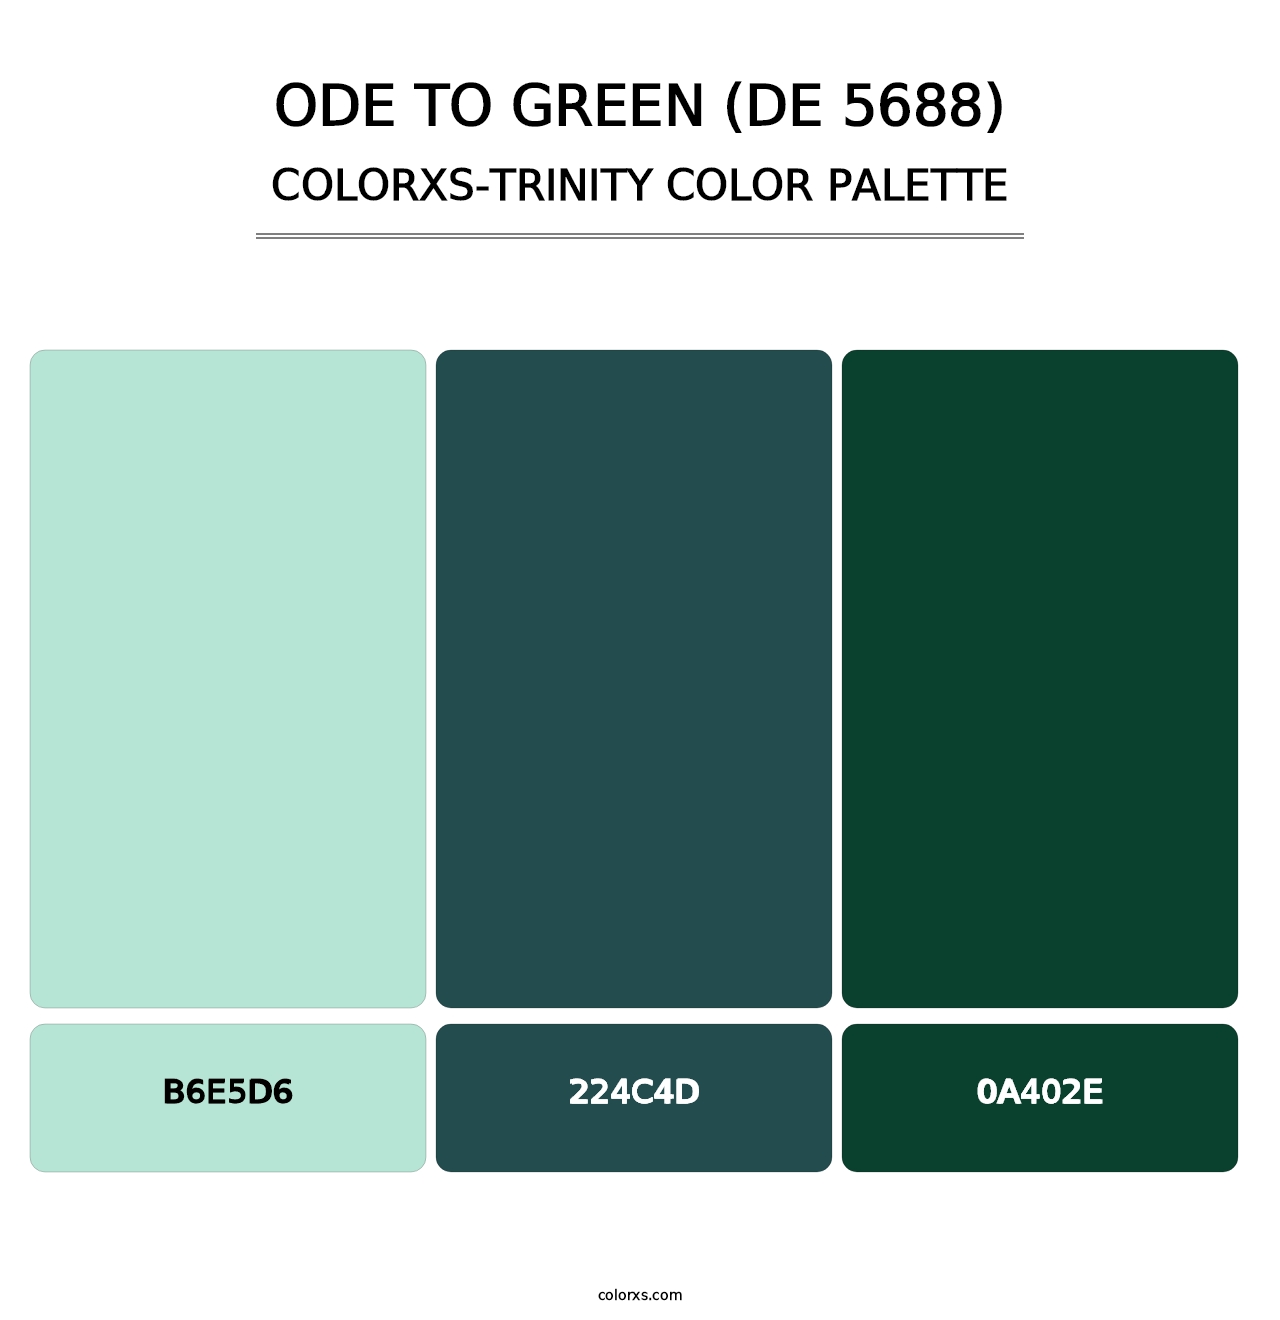 Ode to Green (DE 5688) - Colorxs Trinity Palette